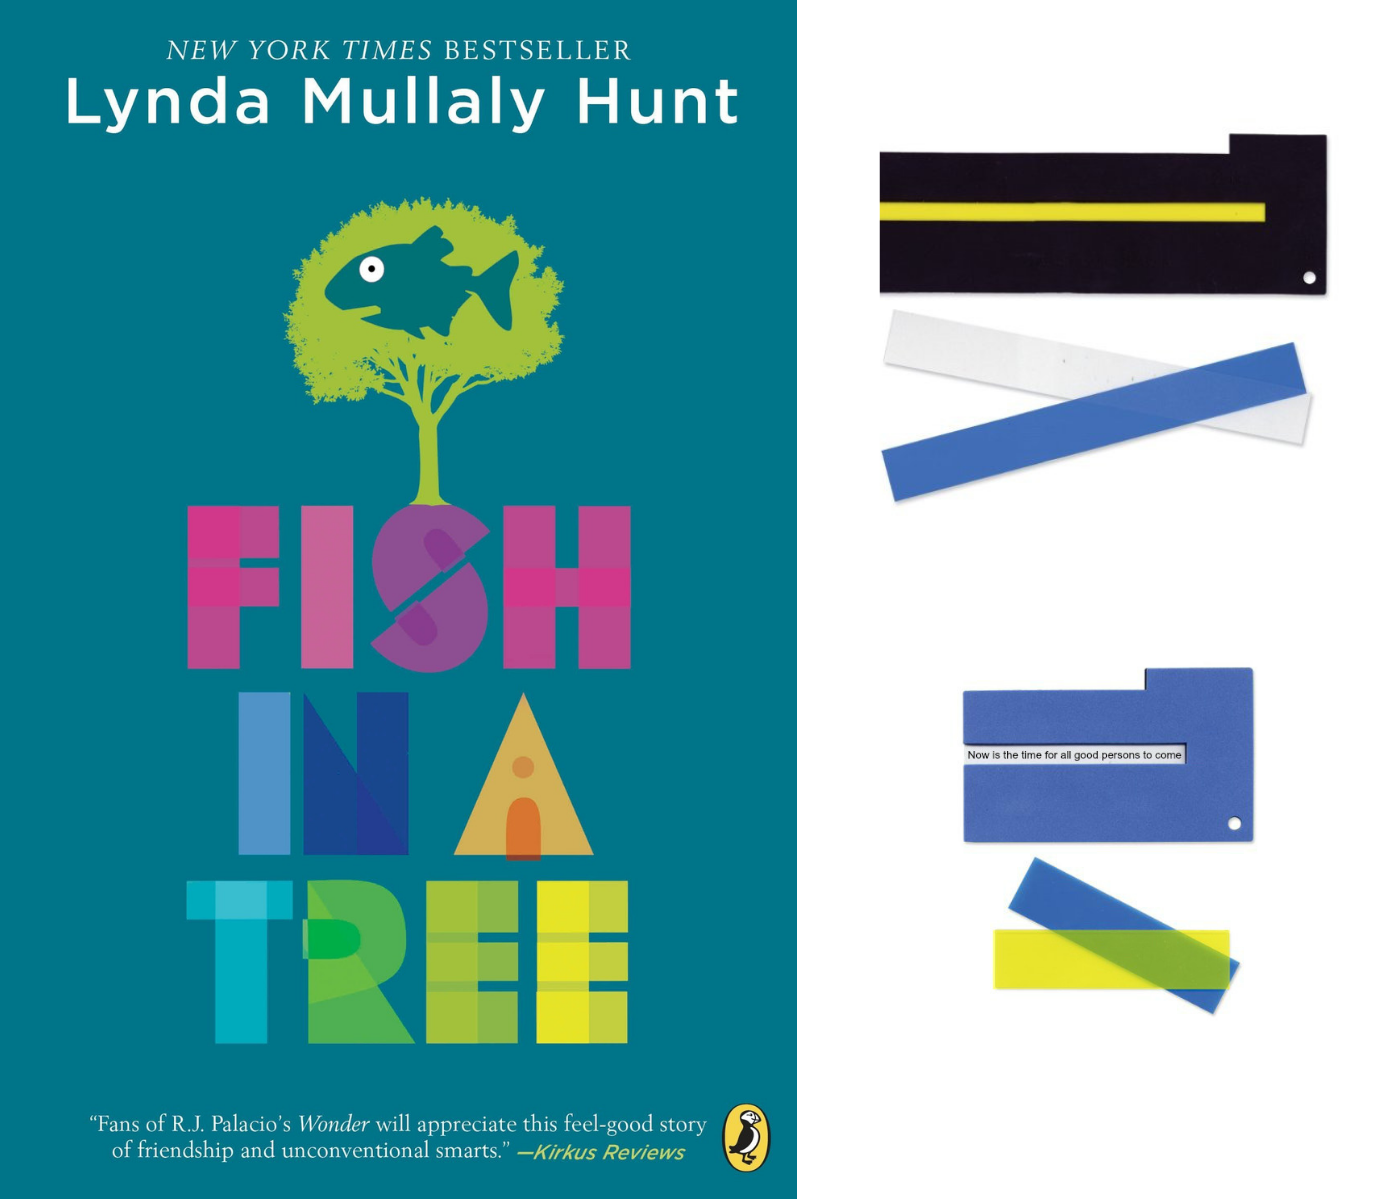 https://focusandread.com/wp-content/uploads/2019/07/Fish-in-a-Tree-Book-Tools-Cropped.png